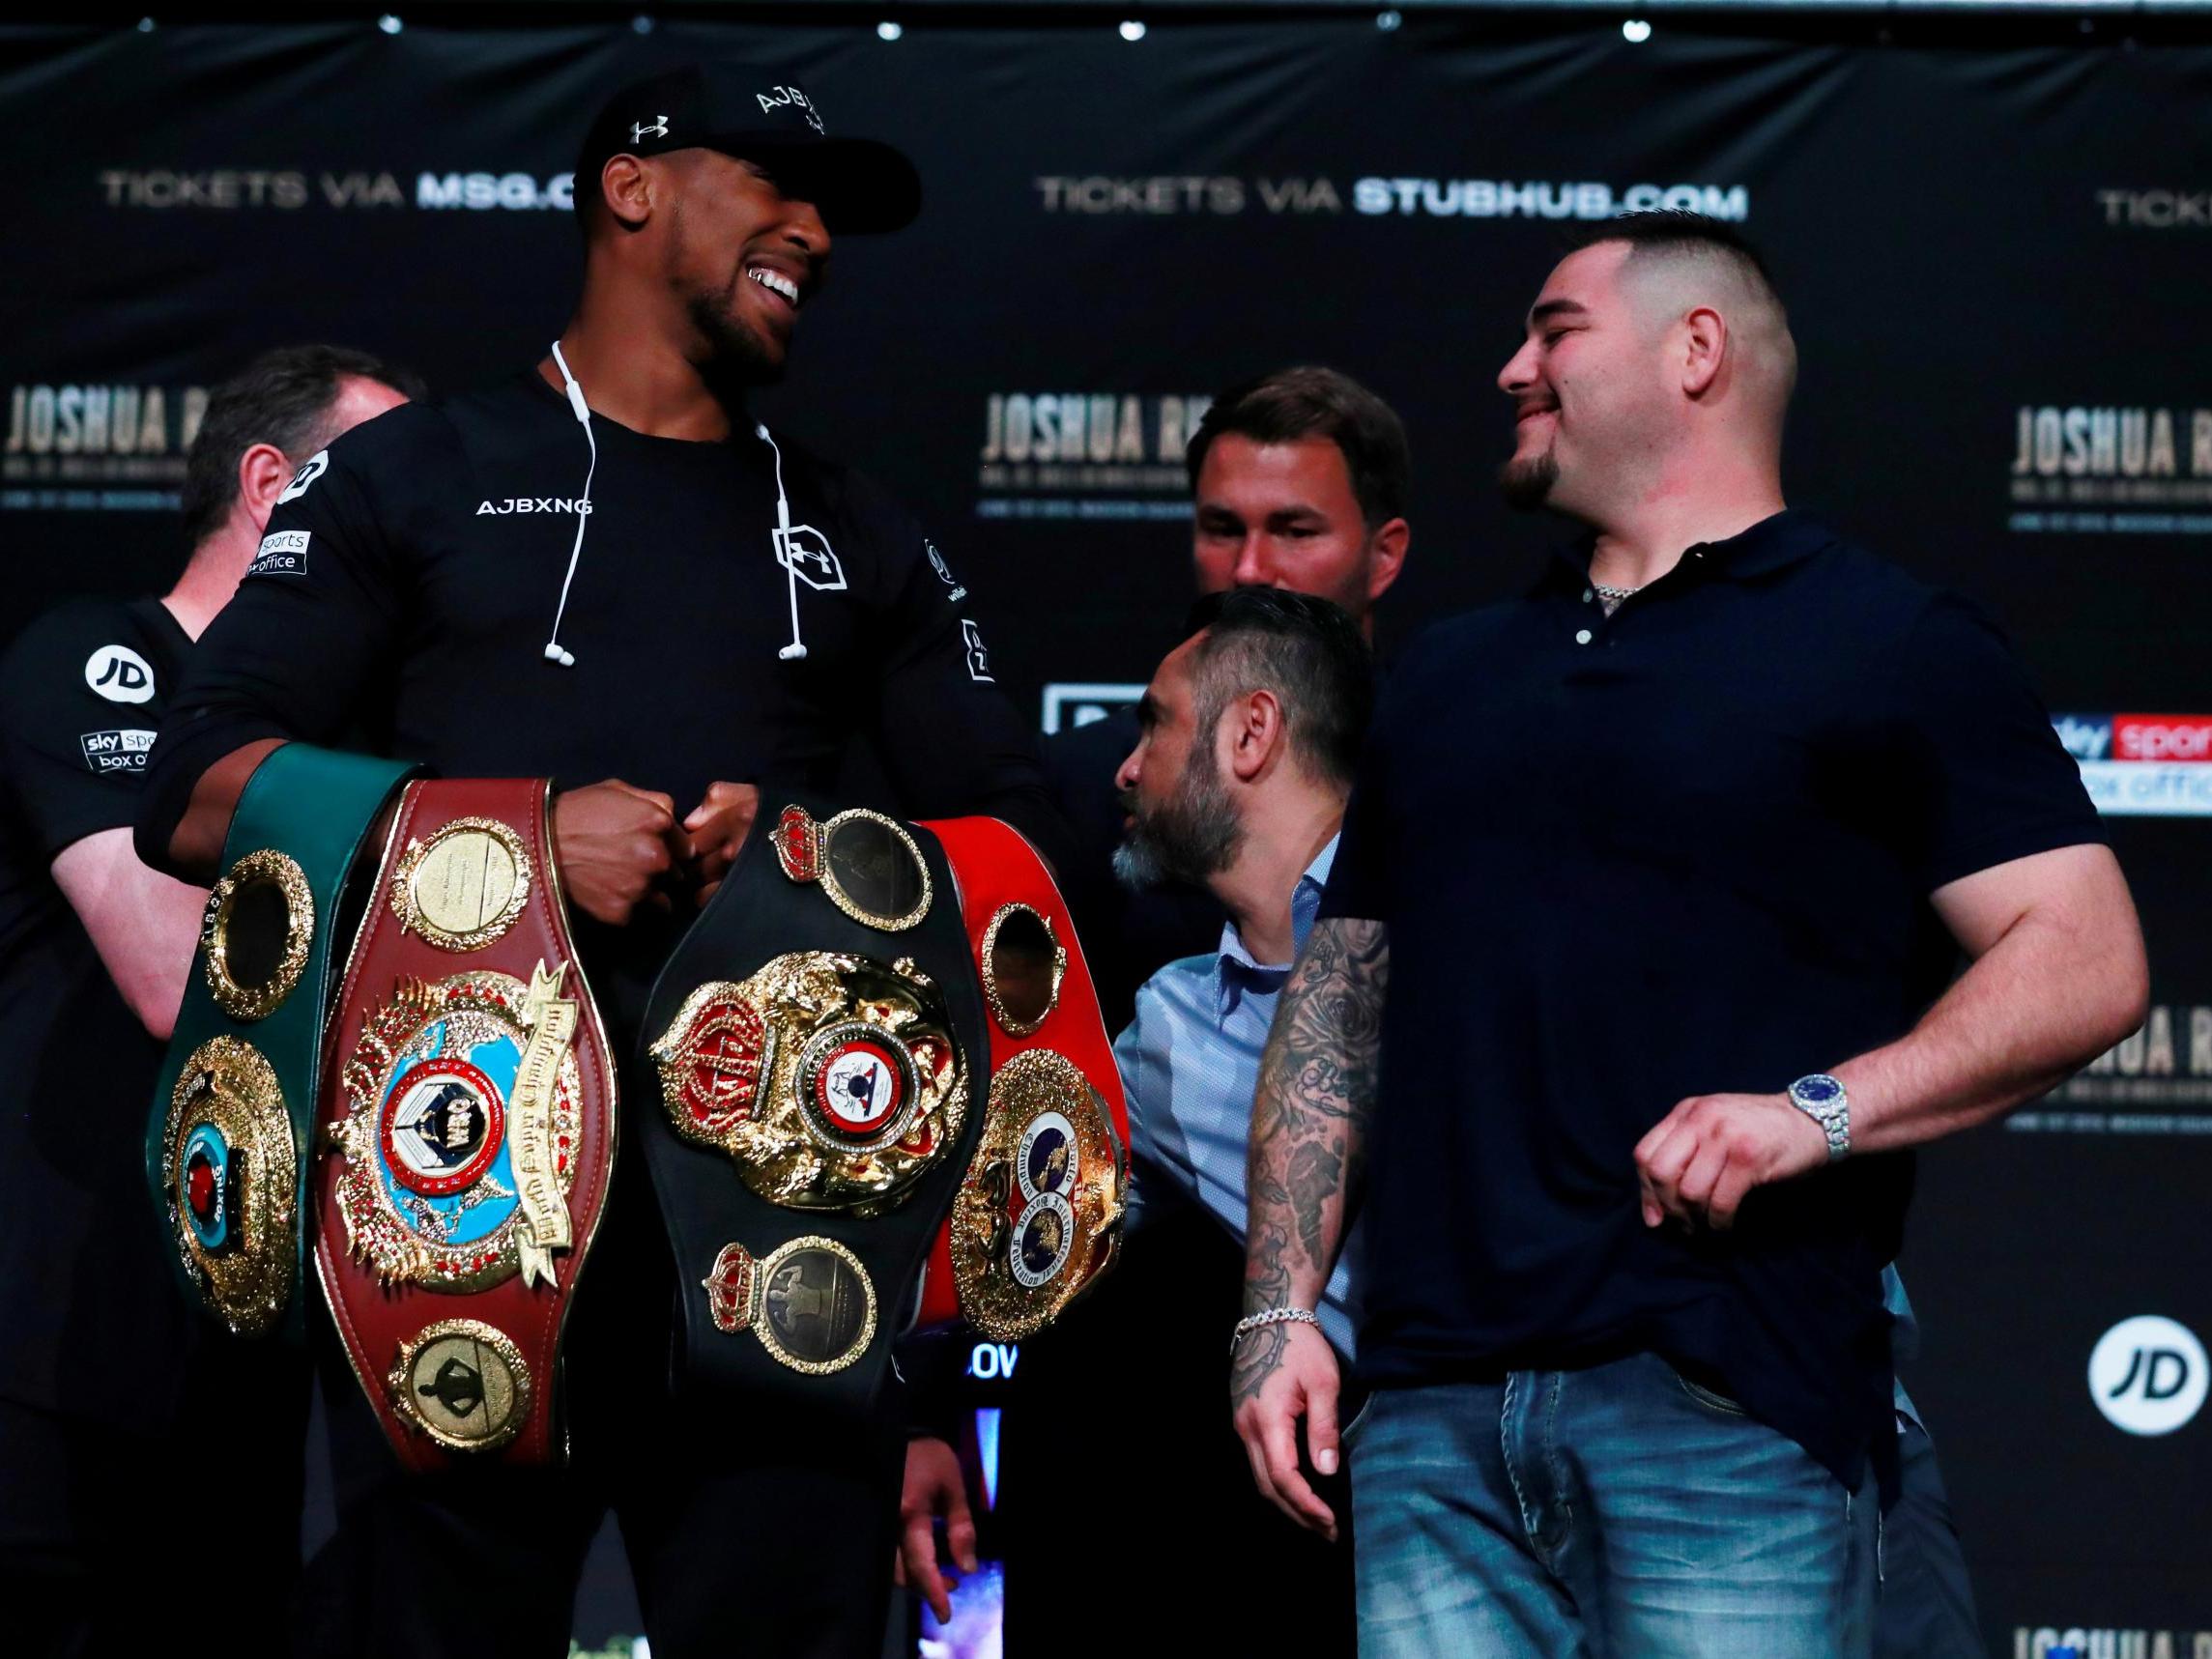 Anthony Joshua vs Andy Ruiz Jr is not the fight we deserve